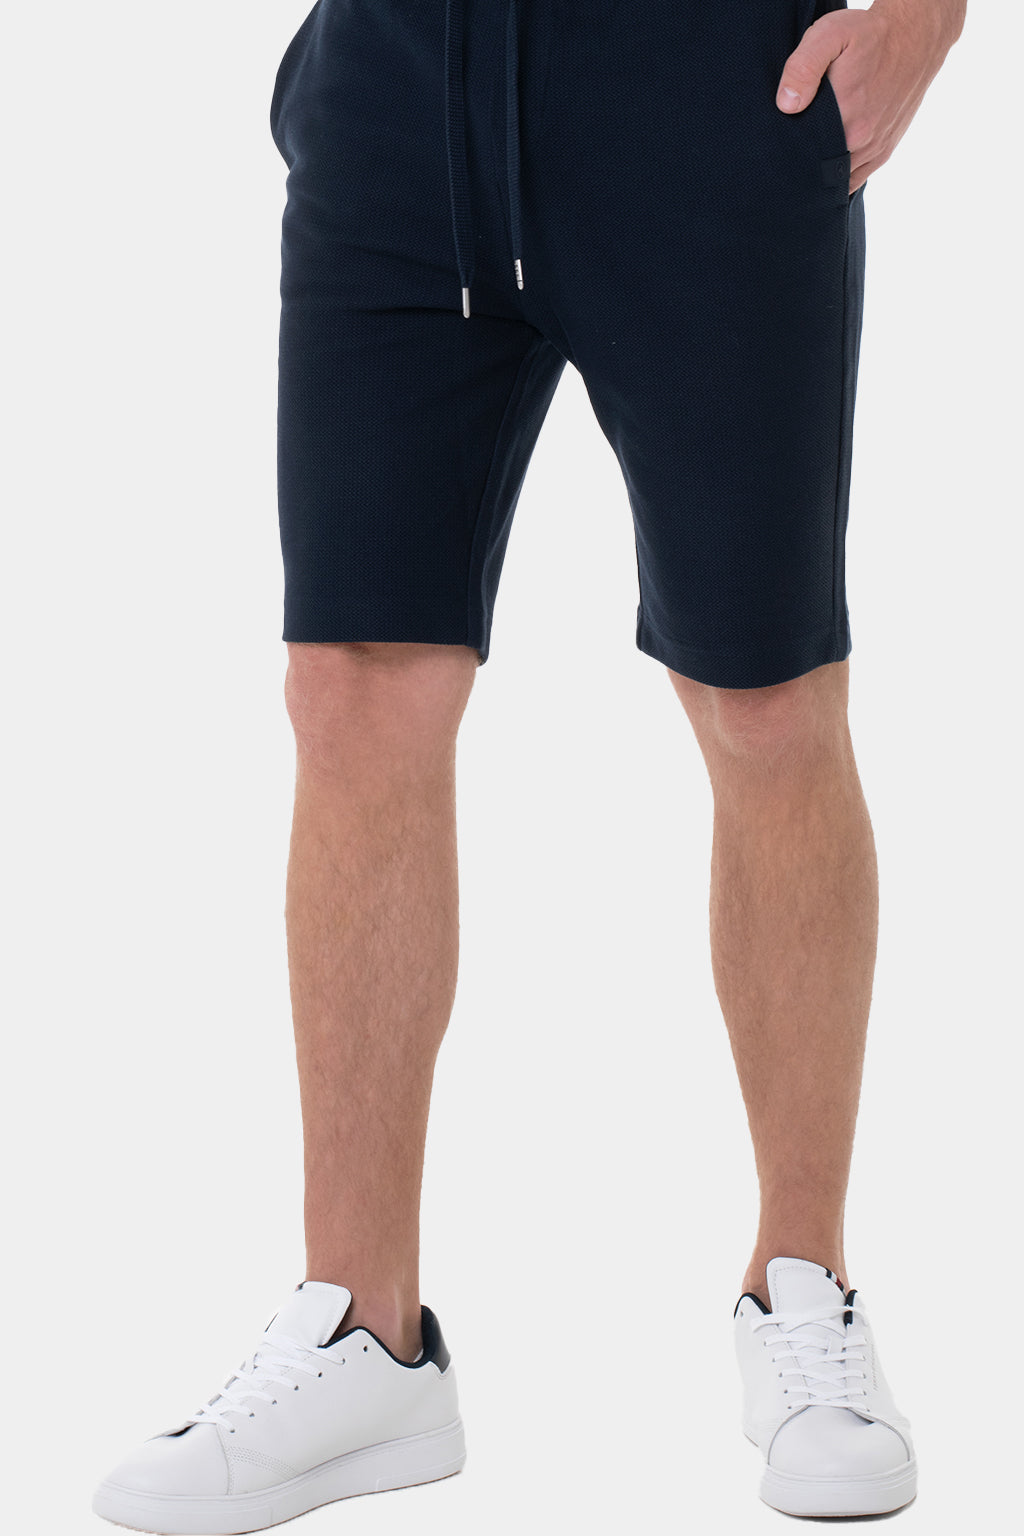 Tom Tailor - Structured sweat short